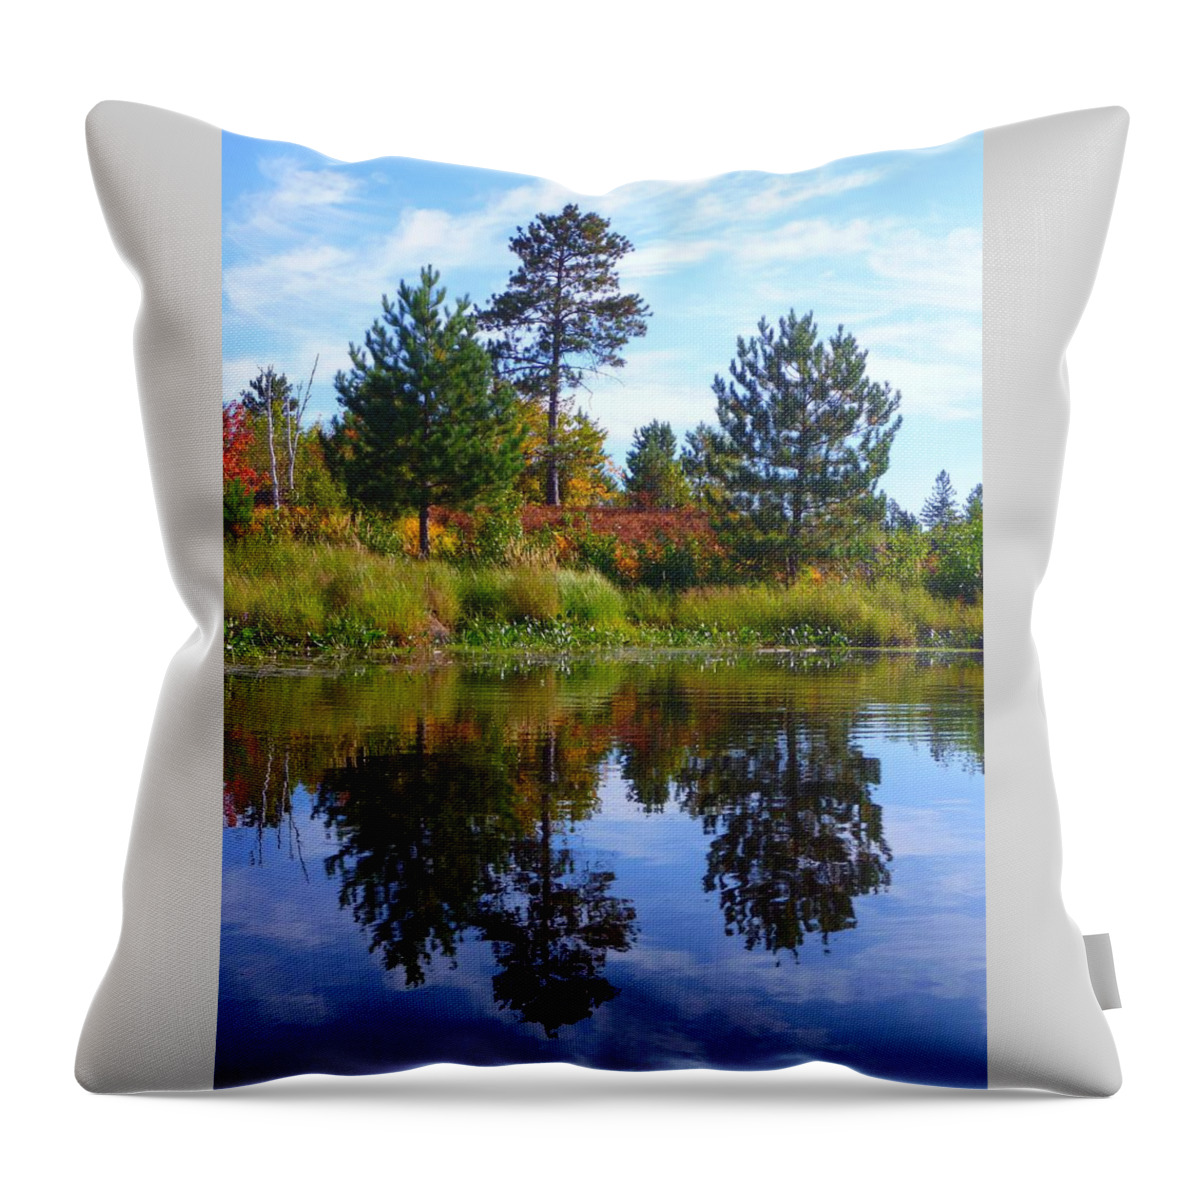 Trees Throw Pillow featuring the photograph Tree Sisters by Gigi Dequanne